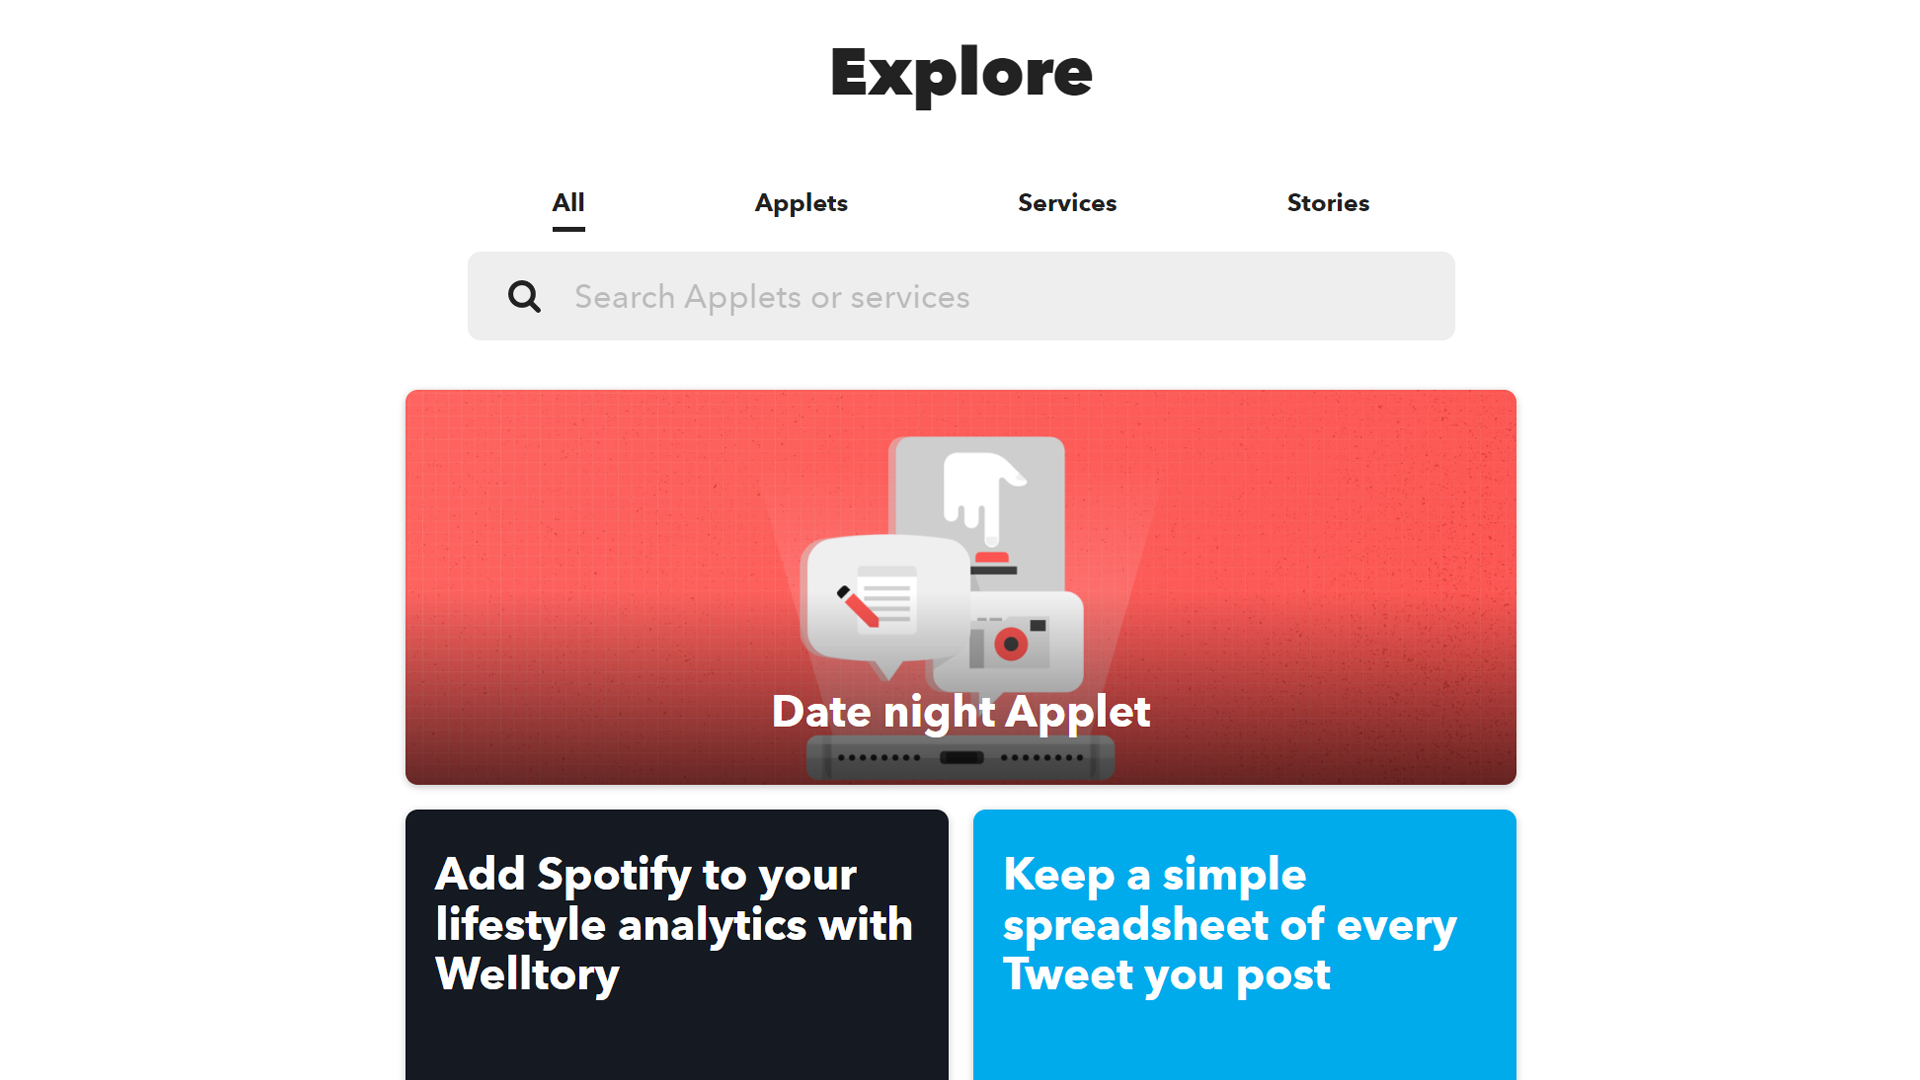 The IFTTT Explore webpage